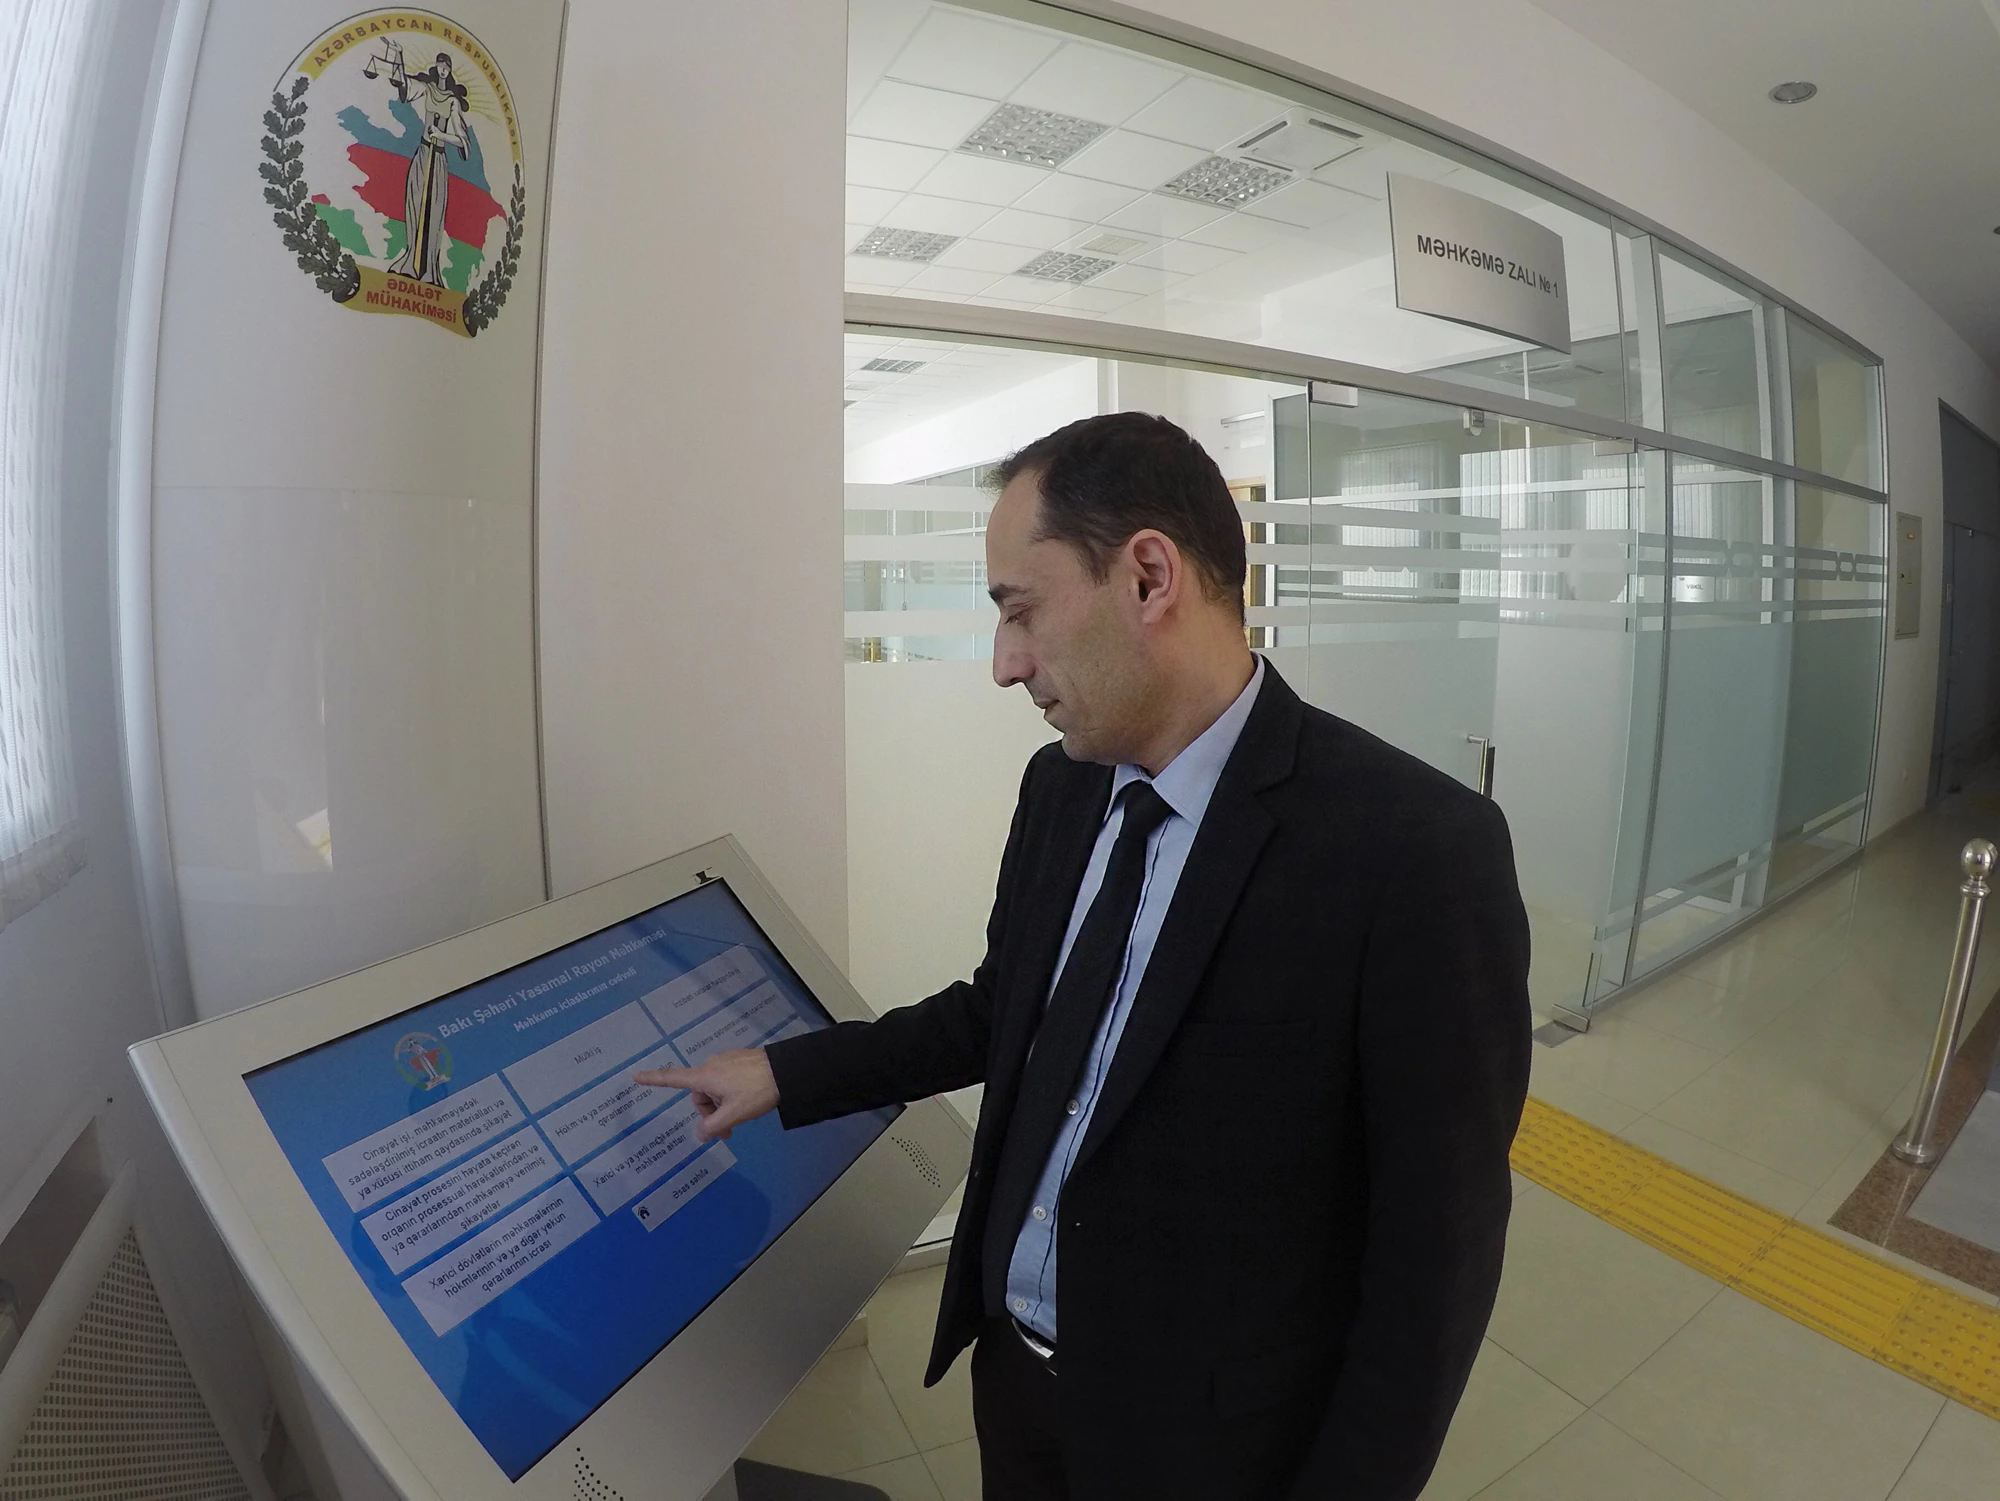 e-Kiosks at courts offer user-friendly information systems to clients